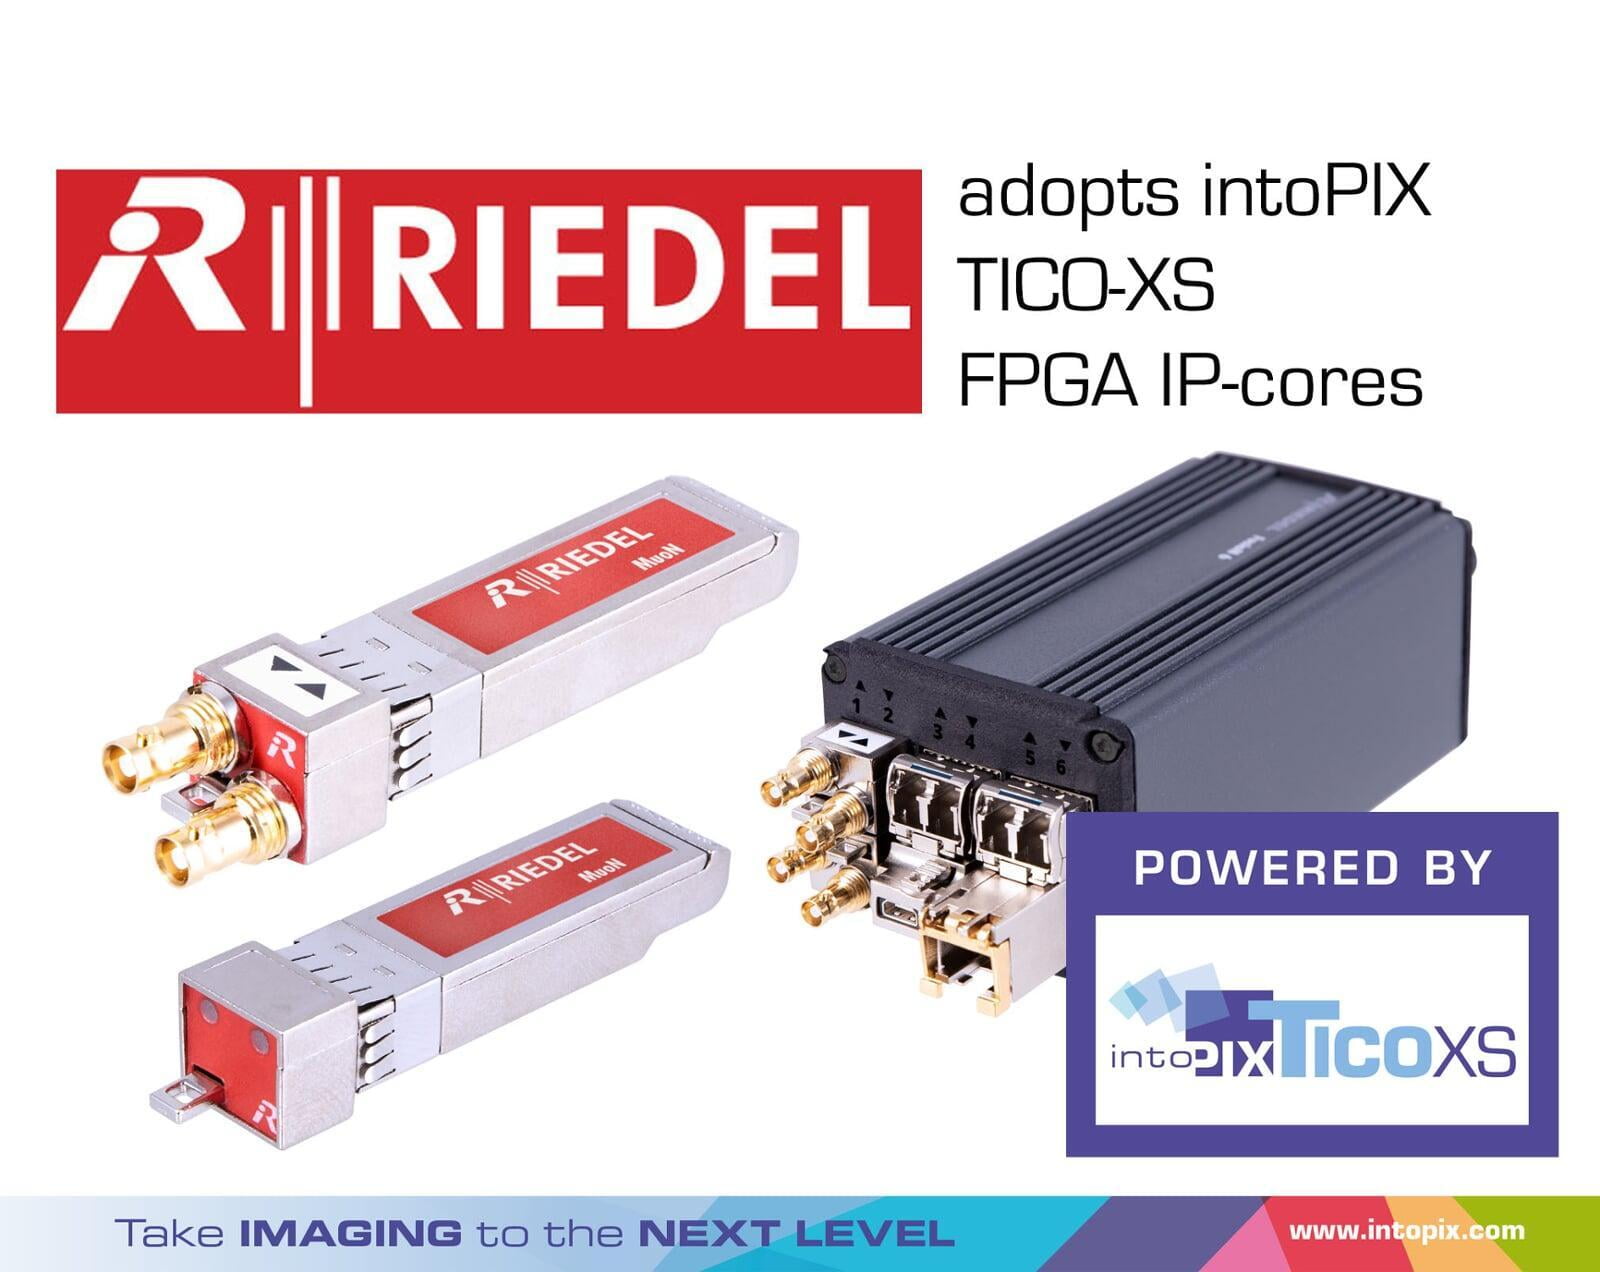 Riedel has integrated the new TICO-XS solution